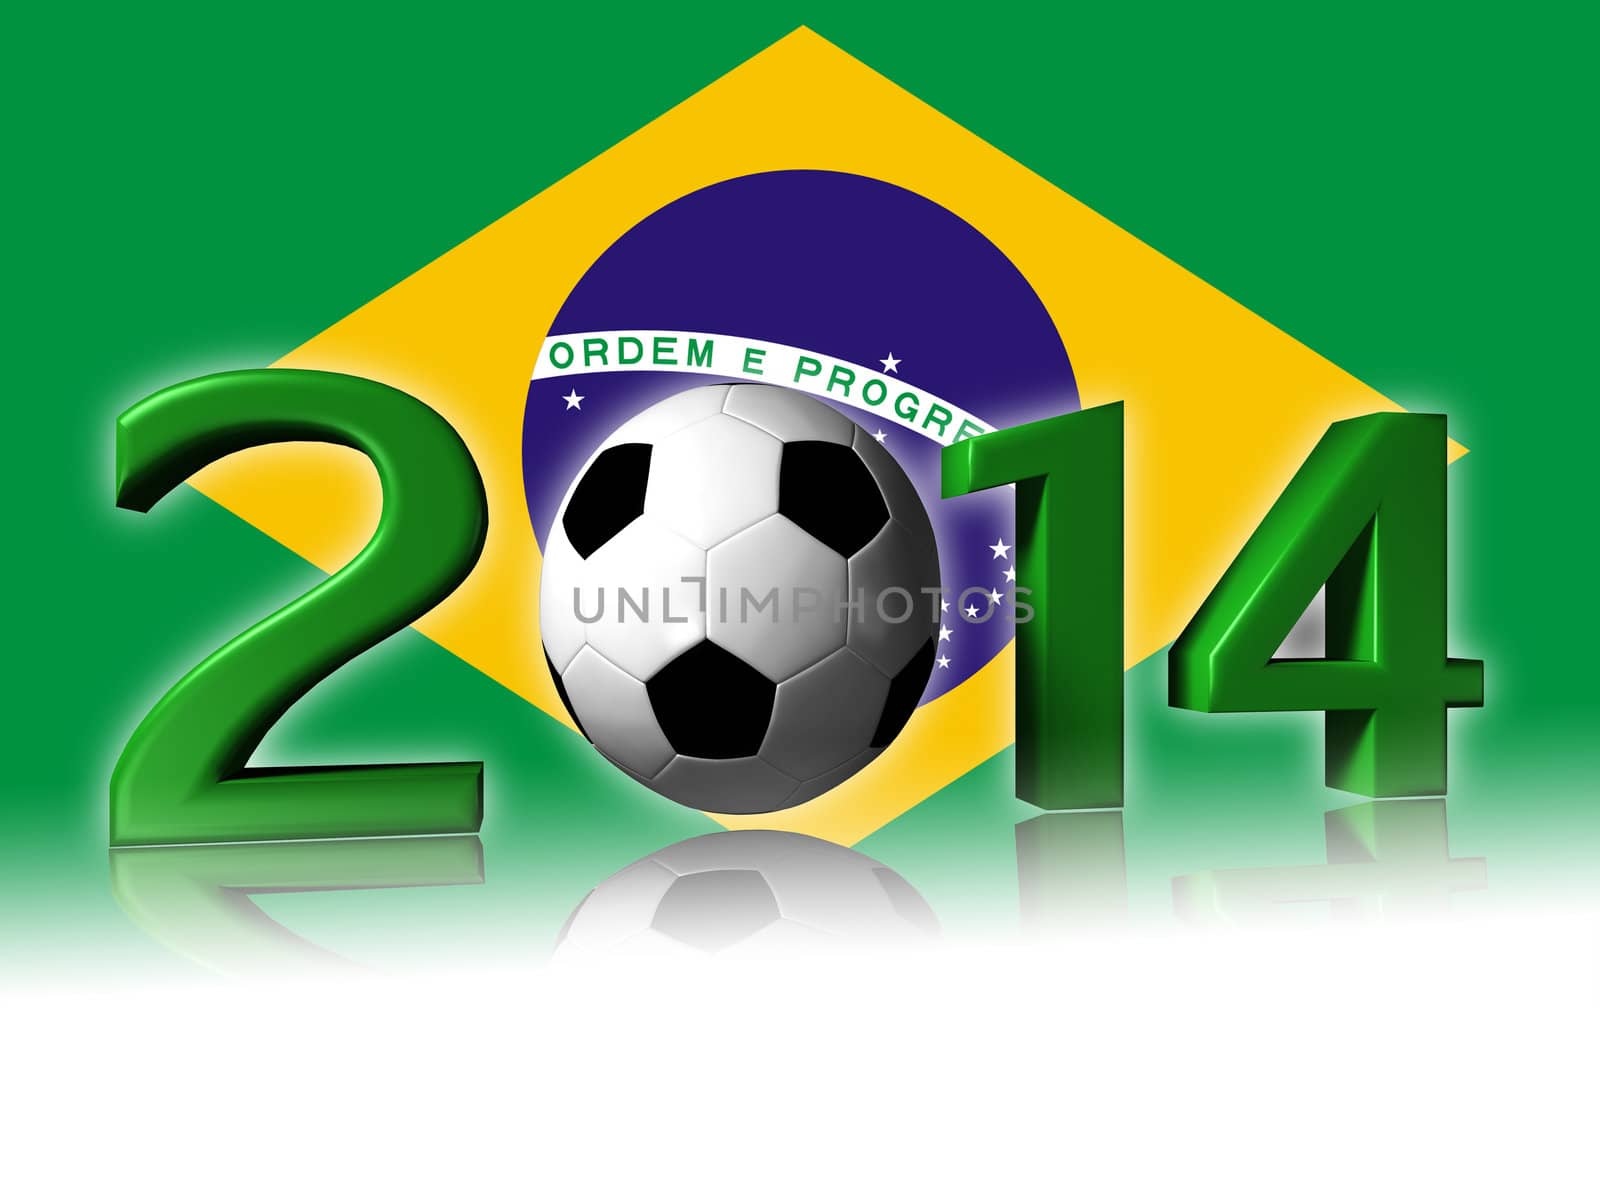 It's a big 2014 soccer logo with brazil flag in background